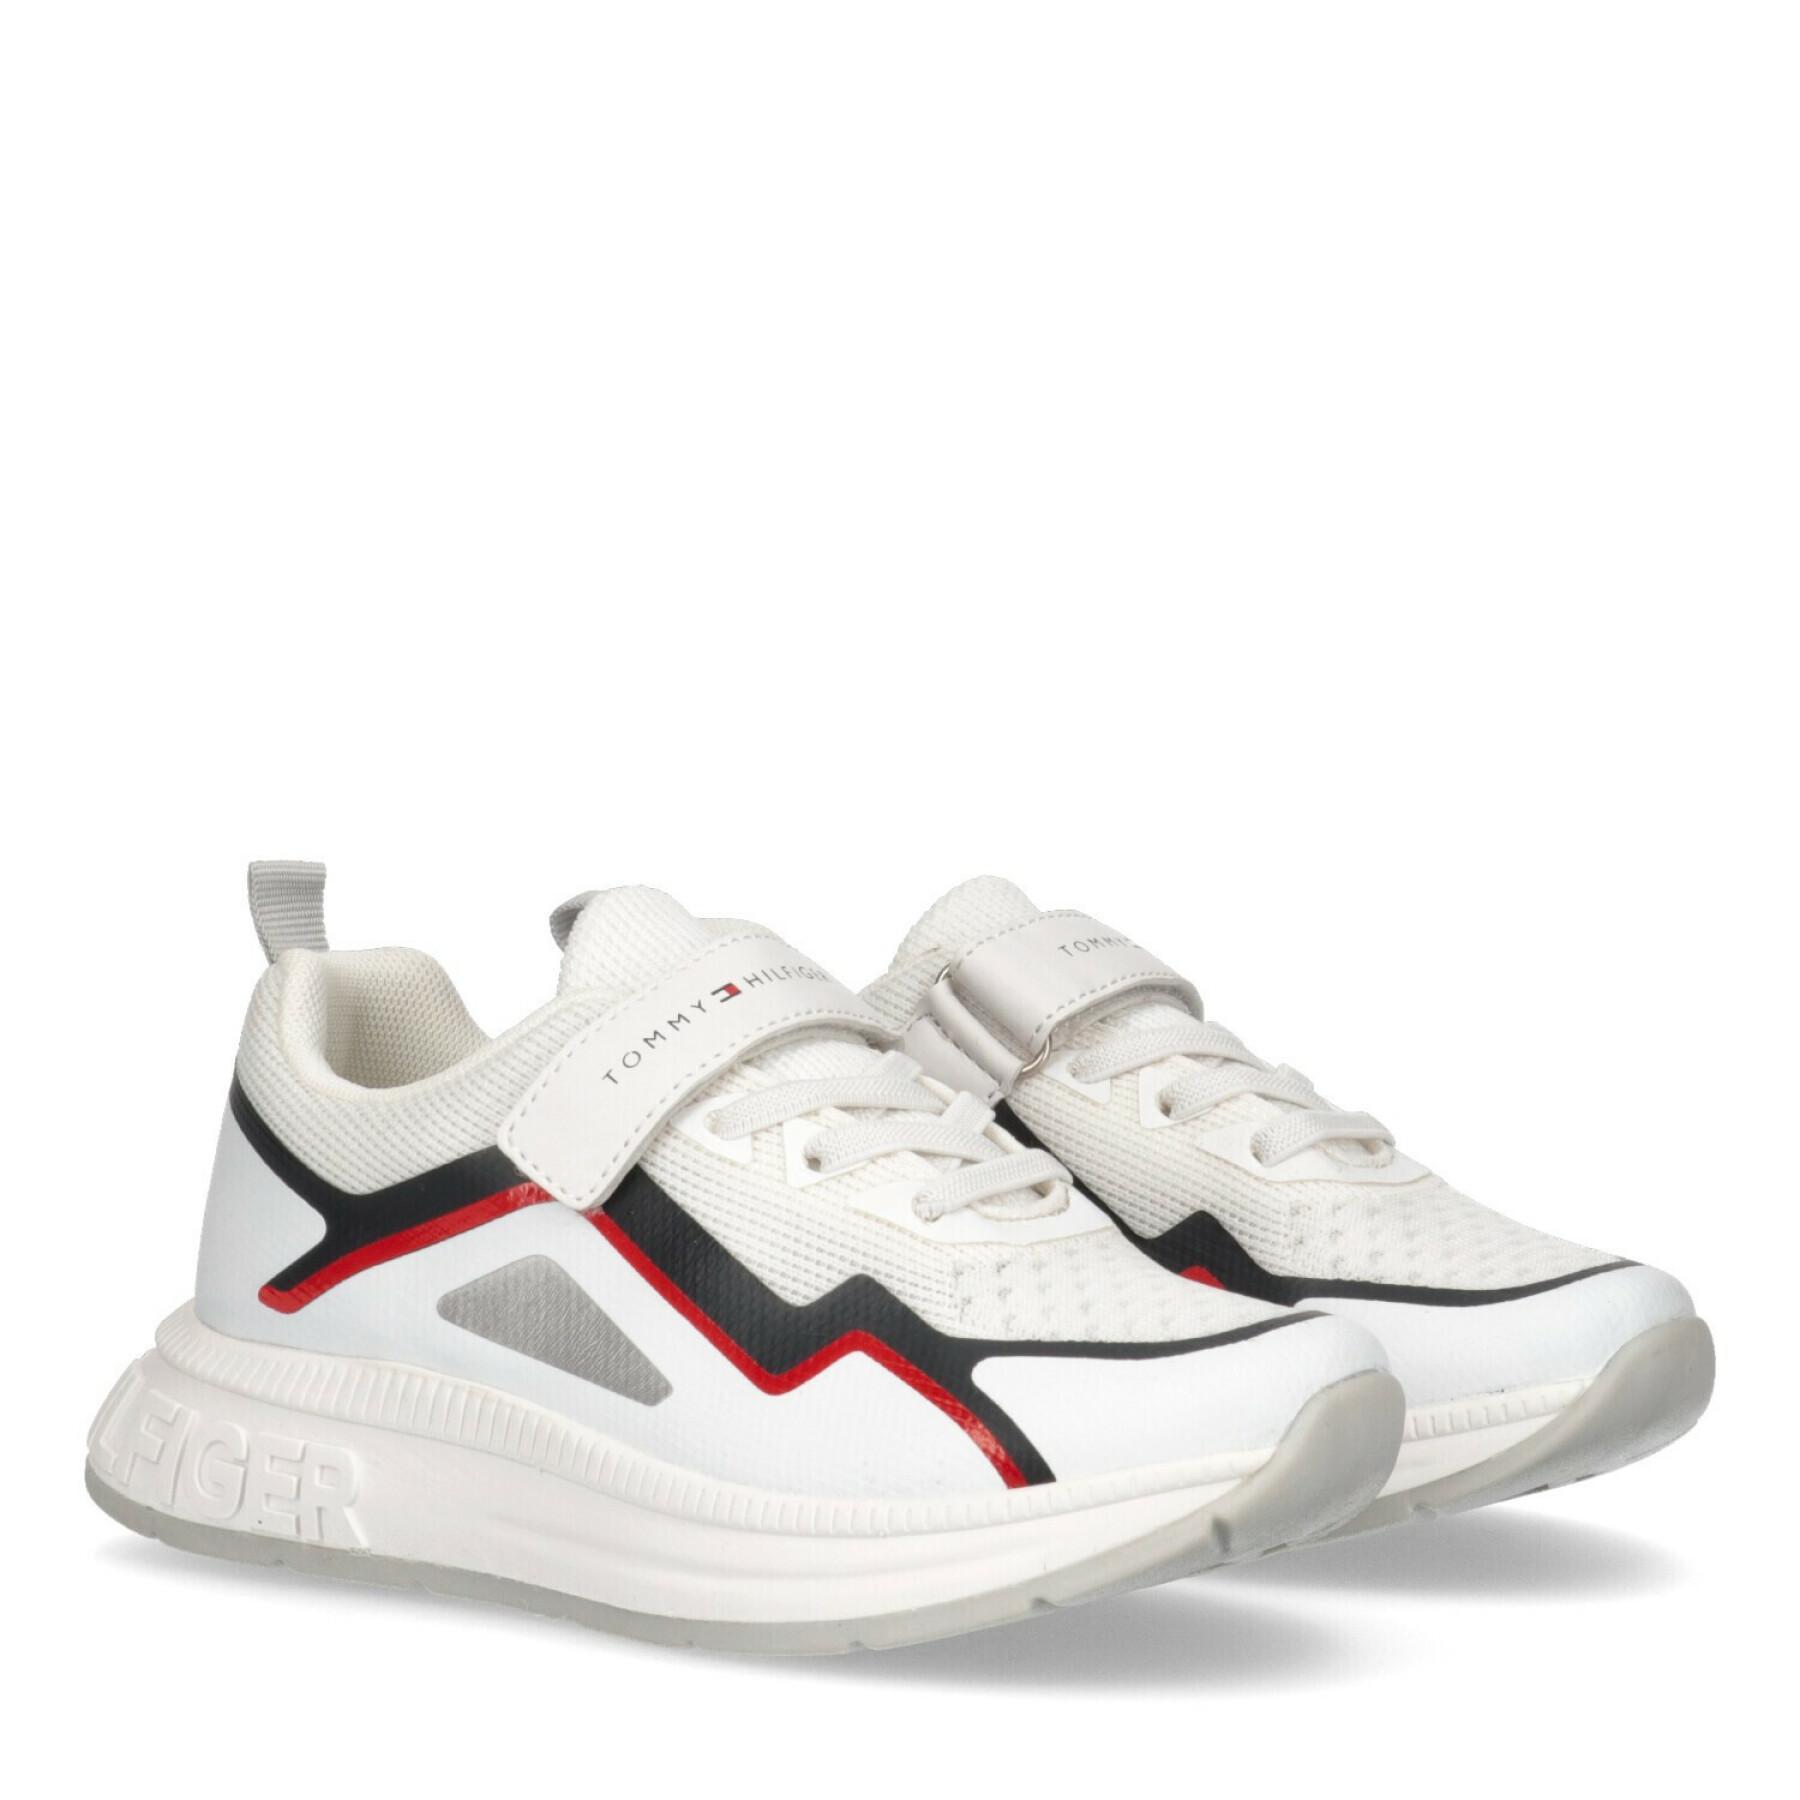 Children's lace-up sneakers Tommy Hilfiger